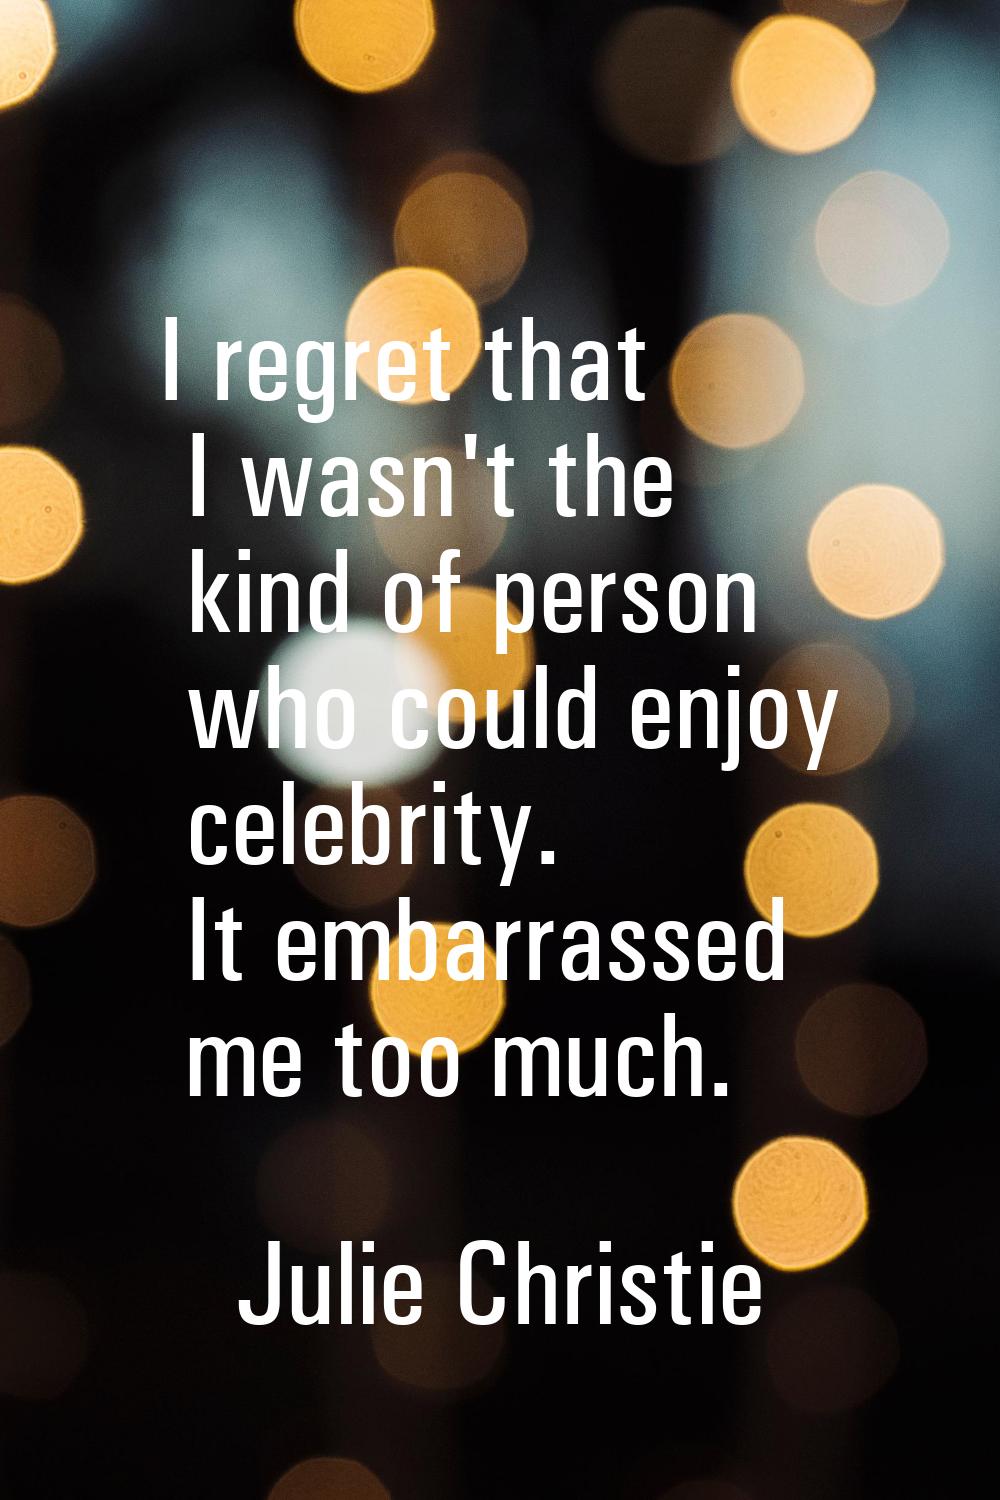 I regret that I wasn't the kind of person who could enjoy celebrity. It embarrassed me too much.